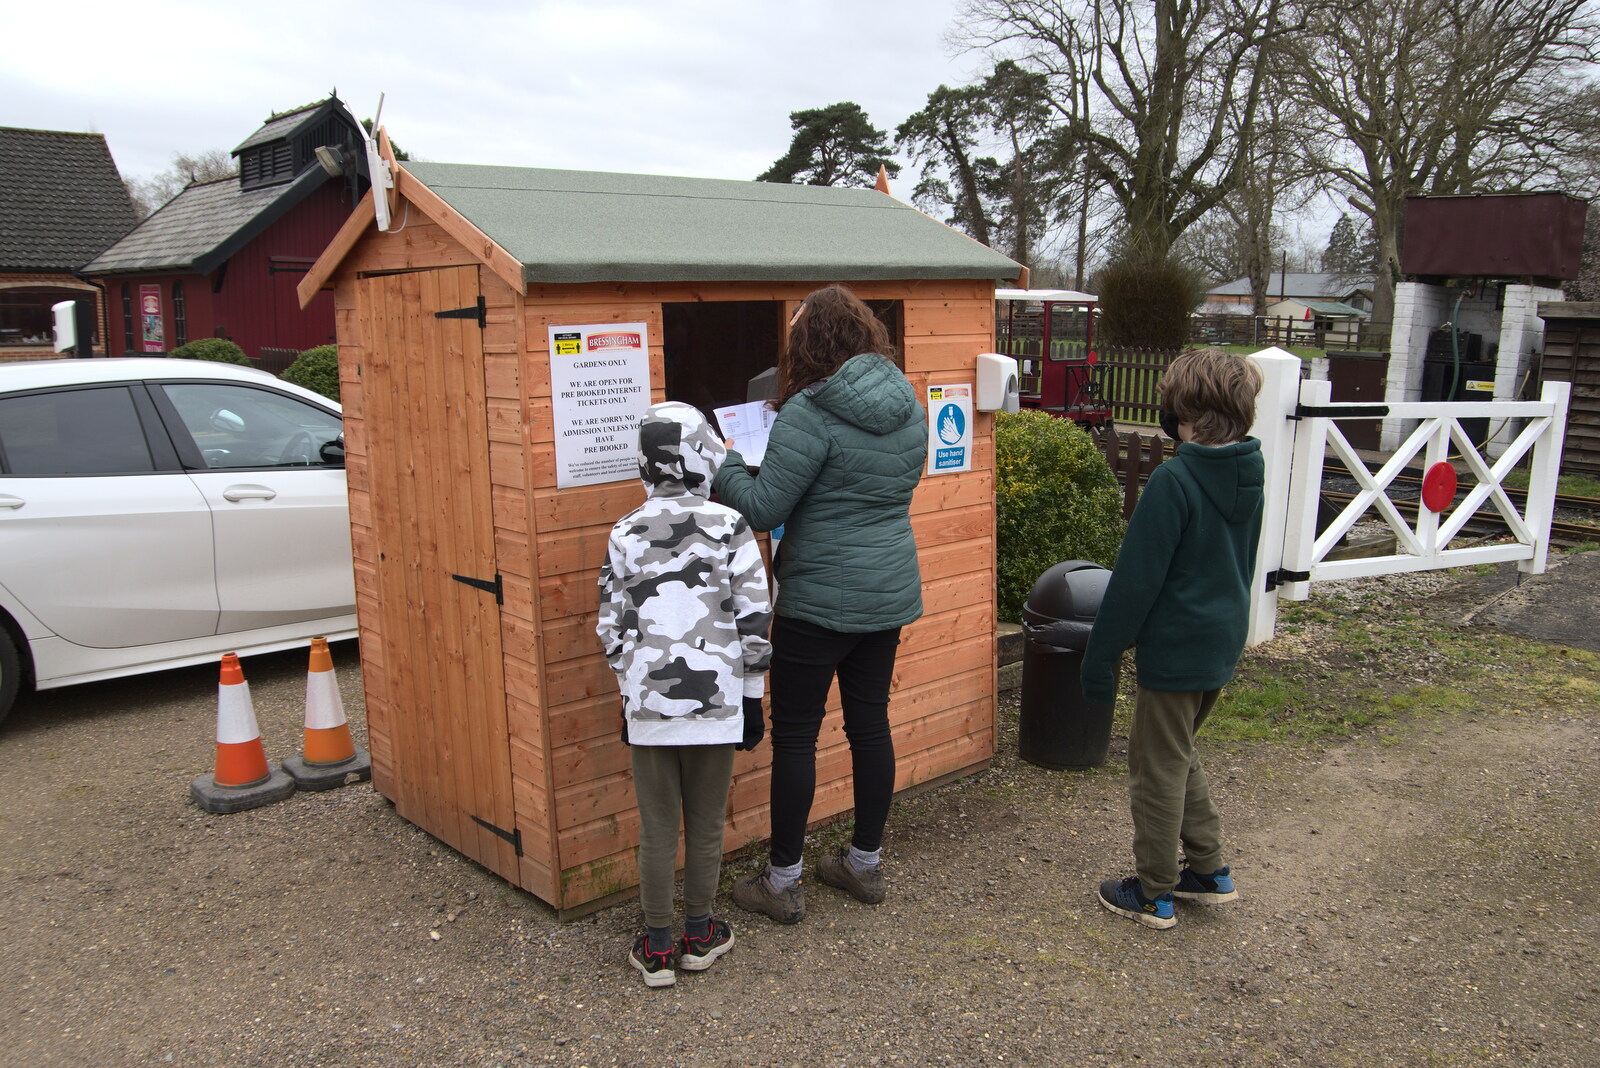 Isobel picks up tickets from the ticket shed from A Return to Bressingham Steam and Gardens, Bressingham, Norfolk - 28th March 2021